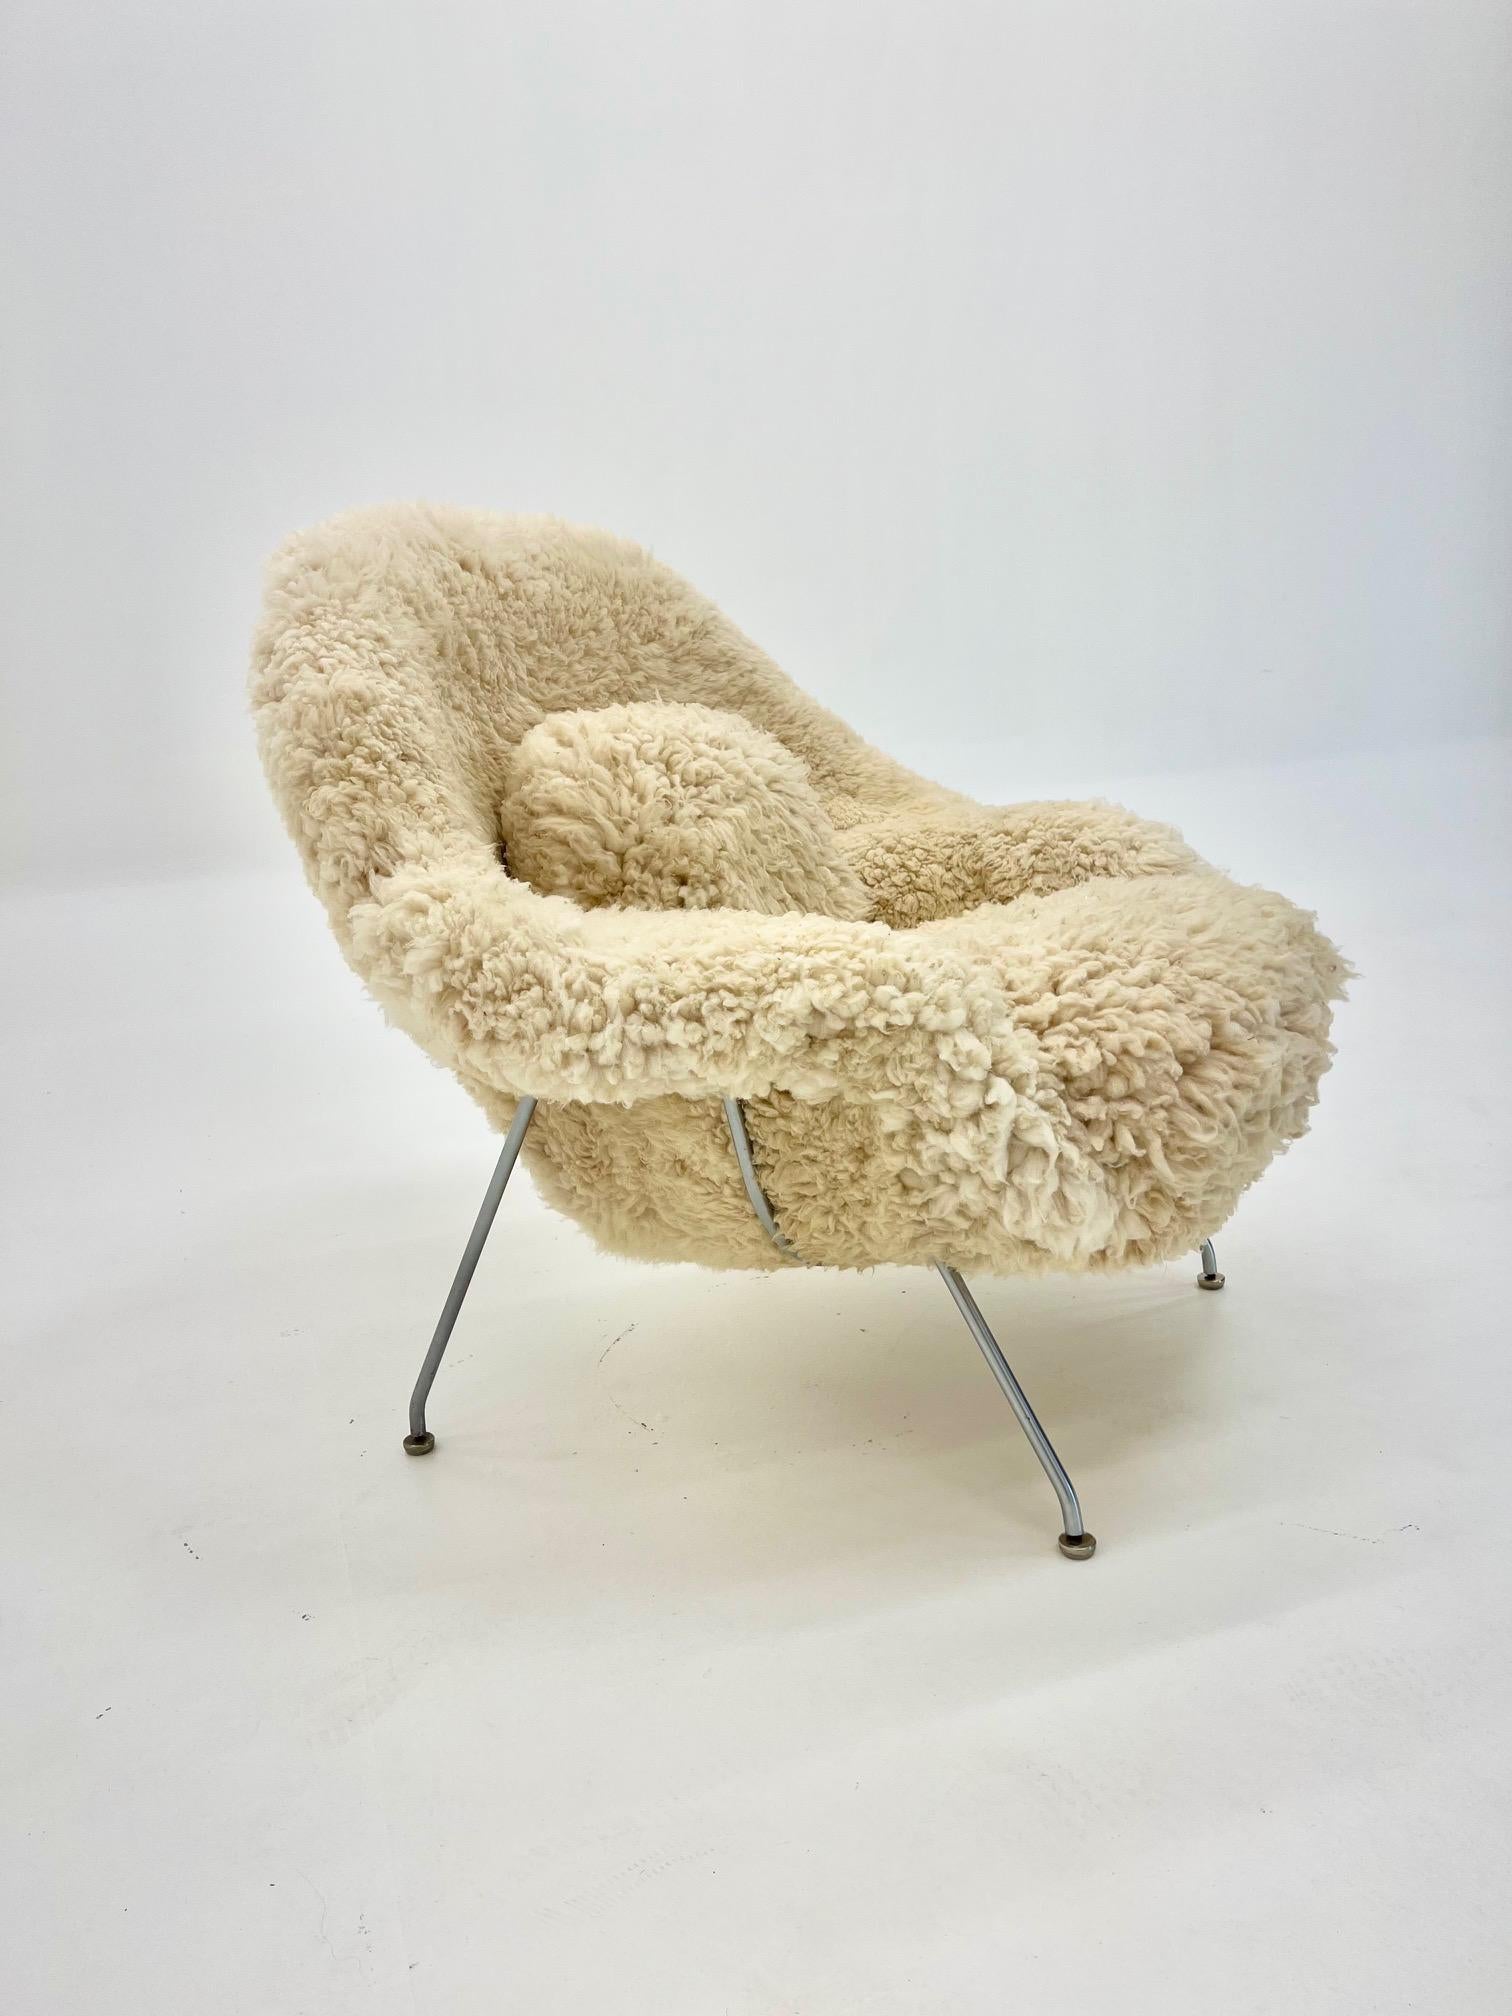 Relax and unwind in this beautifully comfortable original Eero Saarinen Womb Chair and ottoman set. The chair is accompanied by an ottoman of which both are fully reupholstered in high grade New Zealand sheepskin. Fully reupholstered with a new